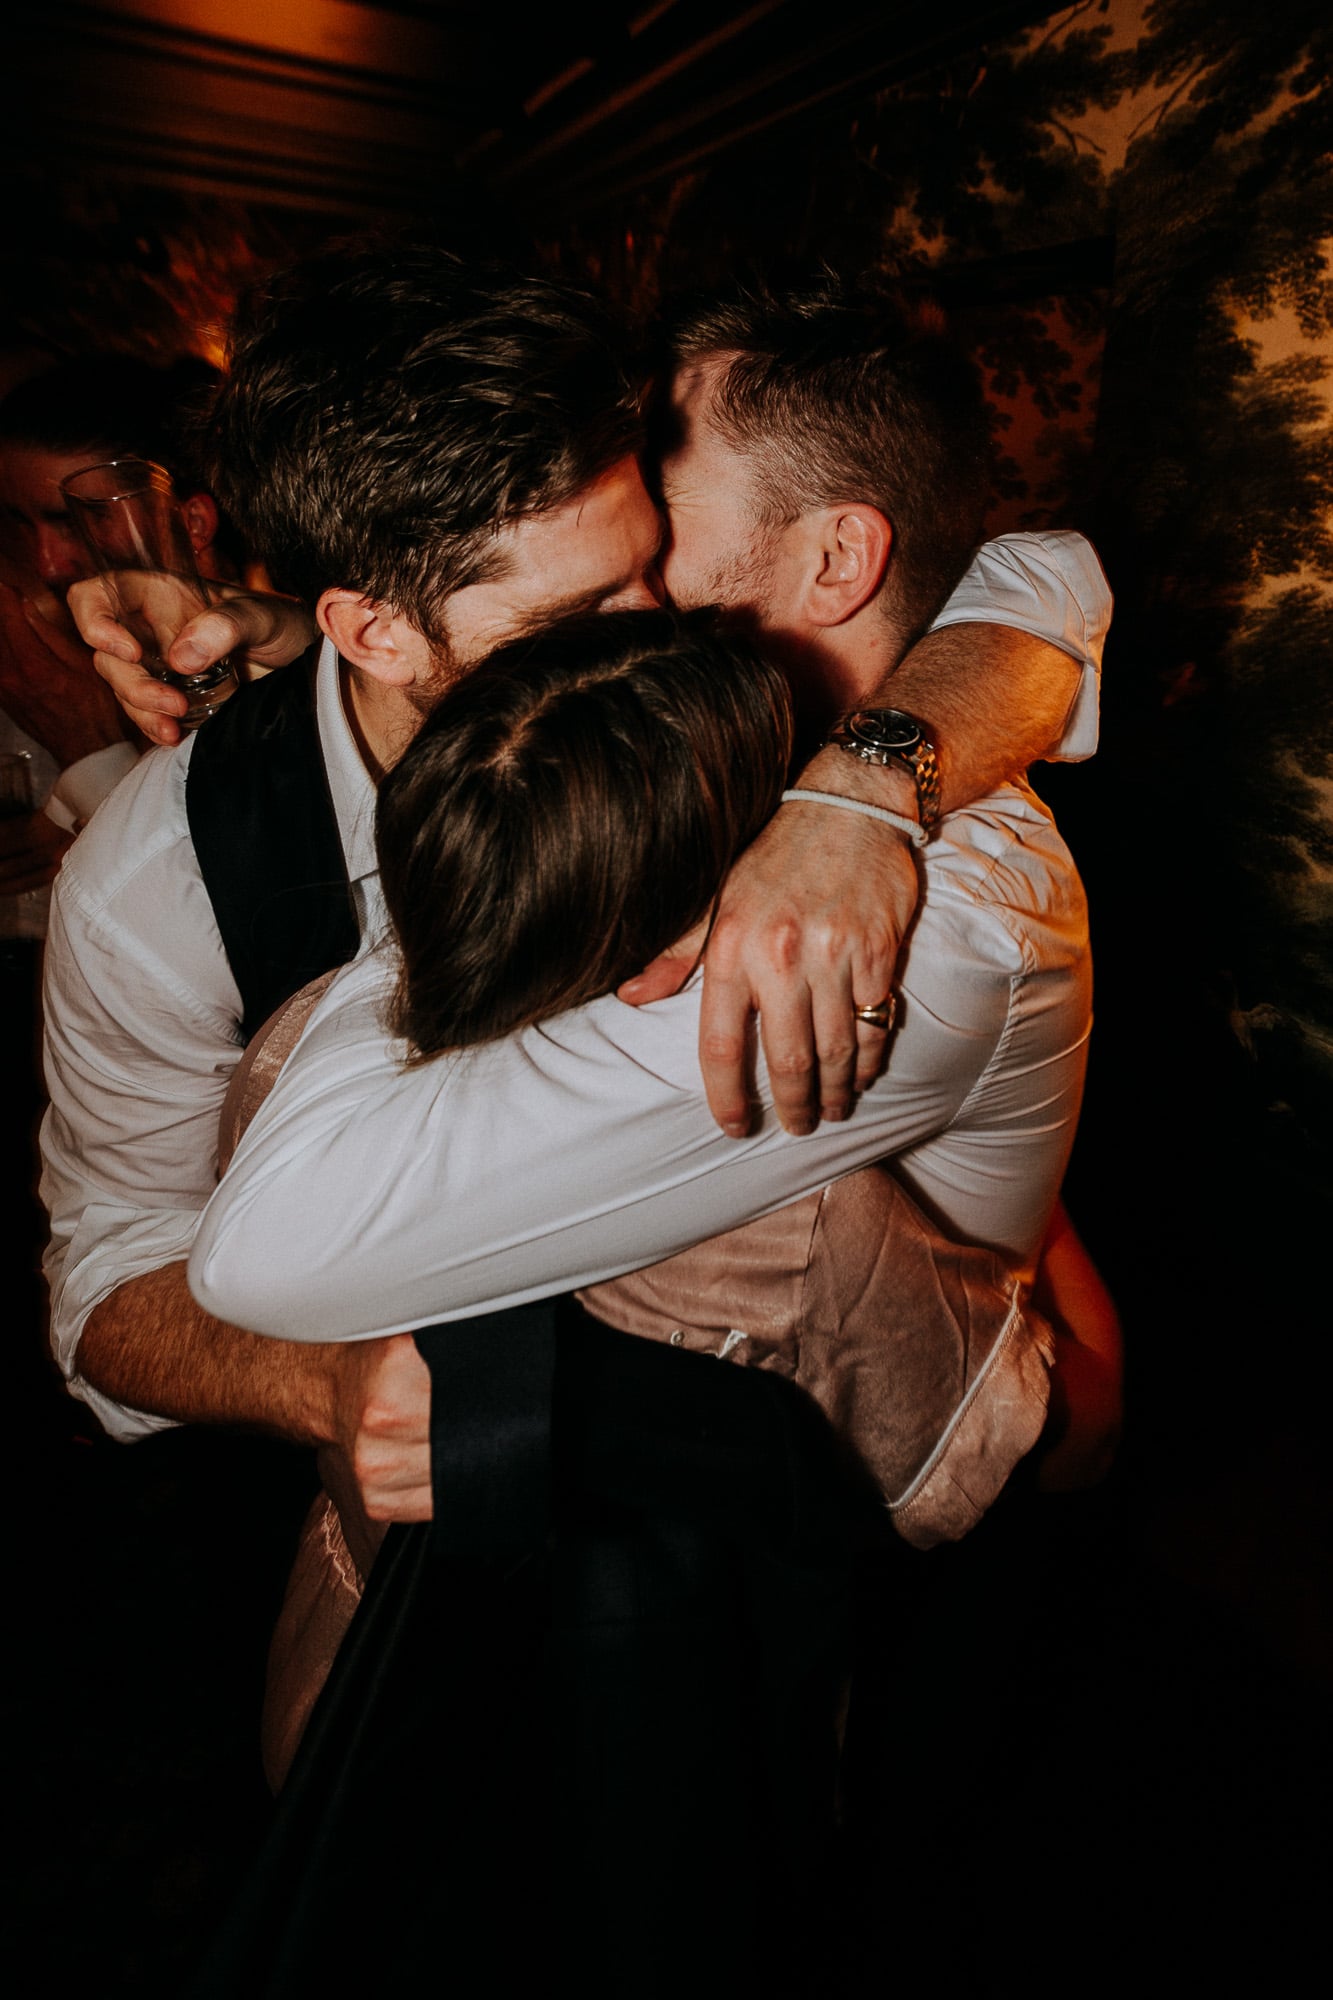 The groom, a glass in his hand, and his friends hug at the party